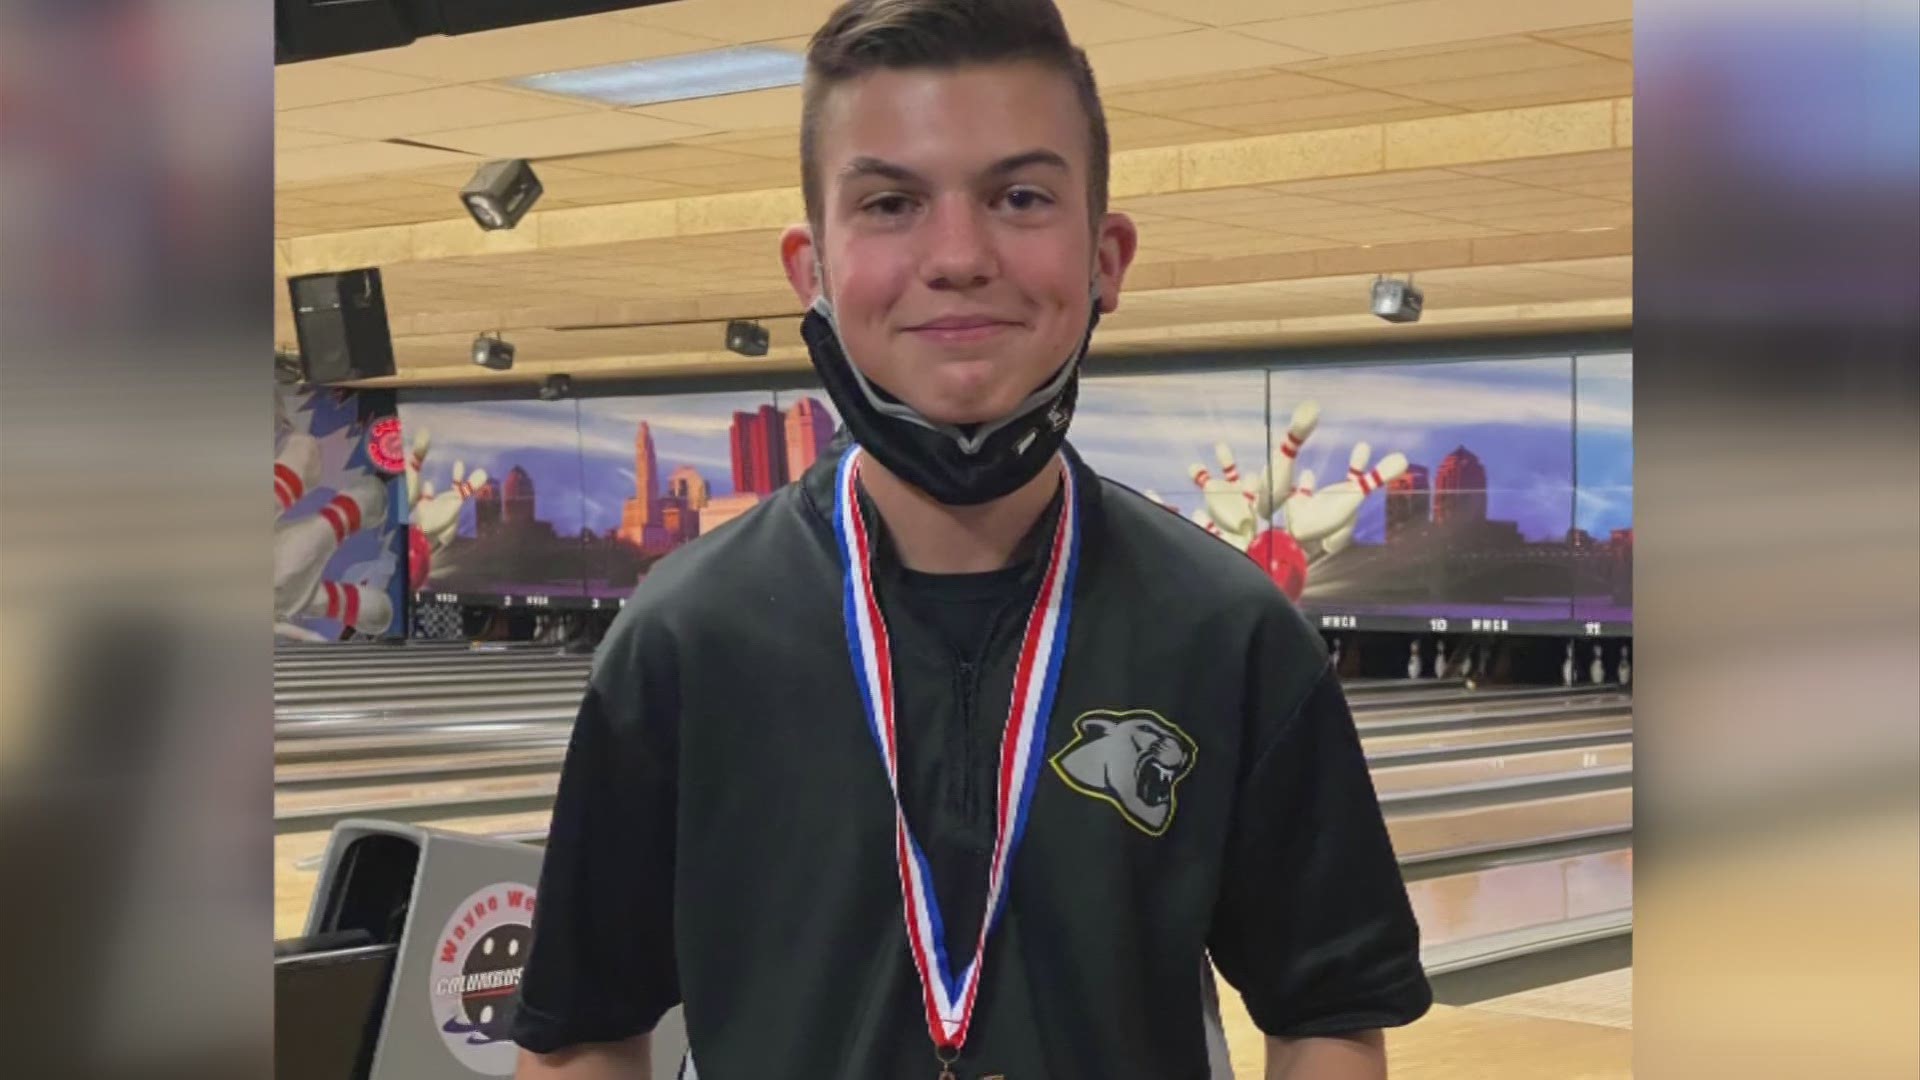 Collins is a bowler for Miami Trace High School and is also a member of the marching band.